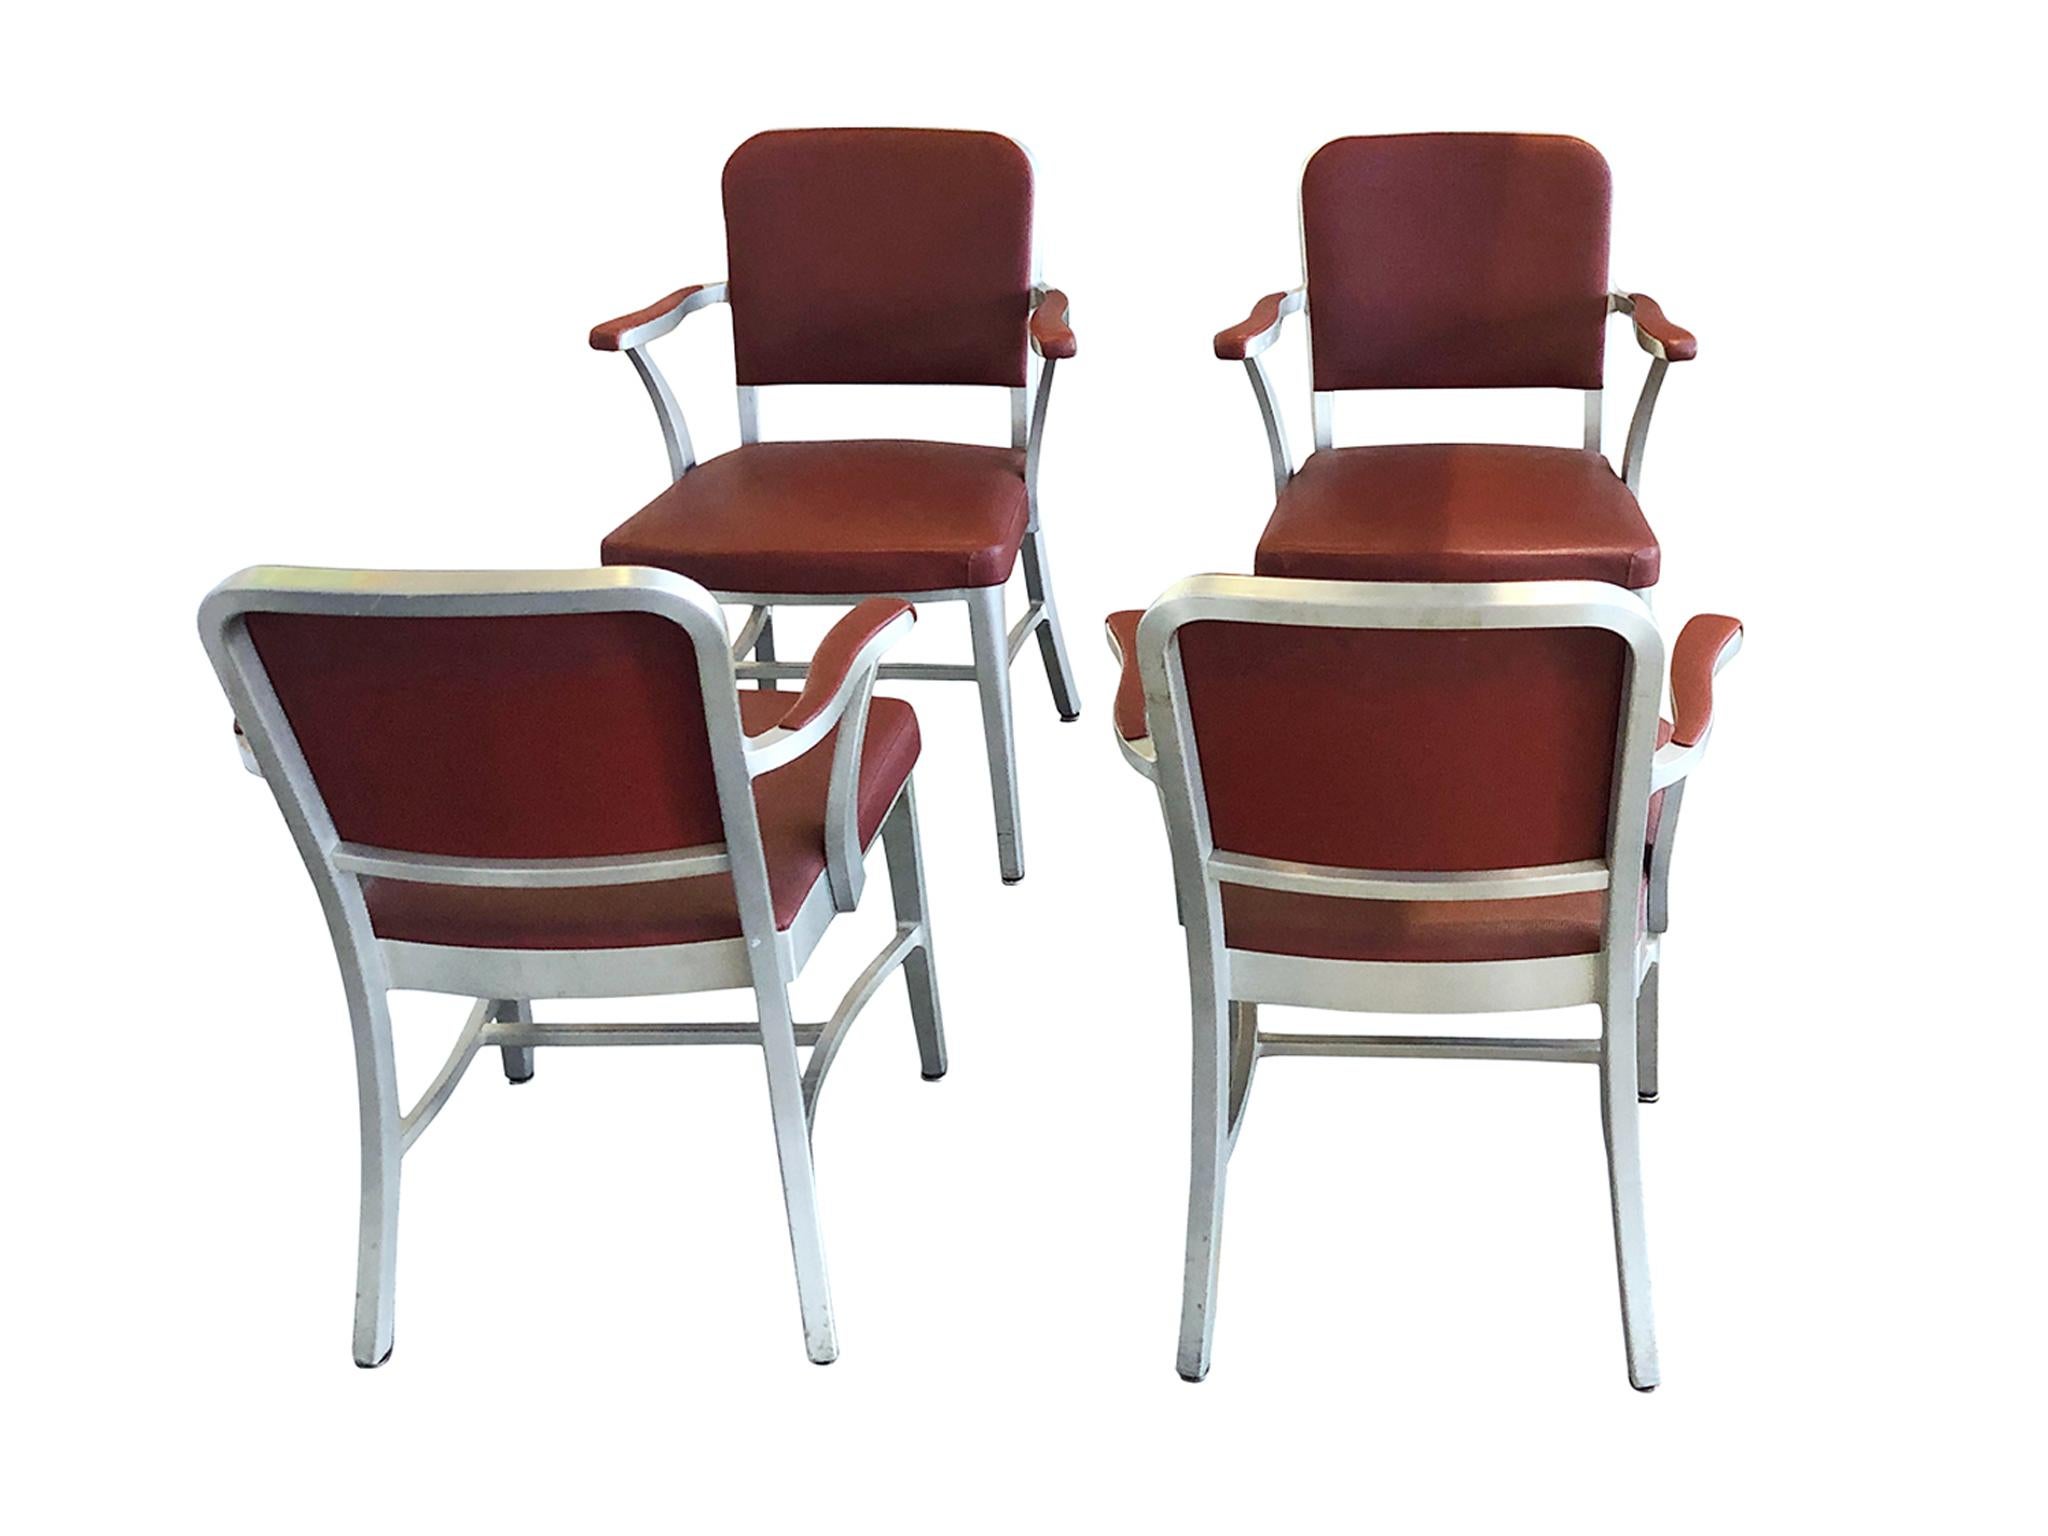 American Set of 4 Midcentury Goodform Aluminum Armchairs by the General Fireproofing Co.